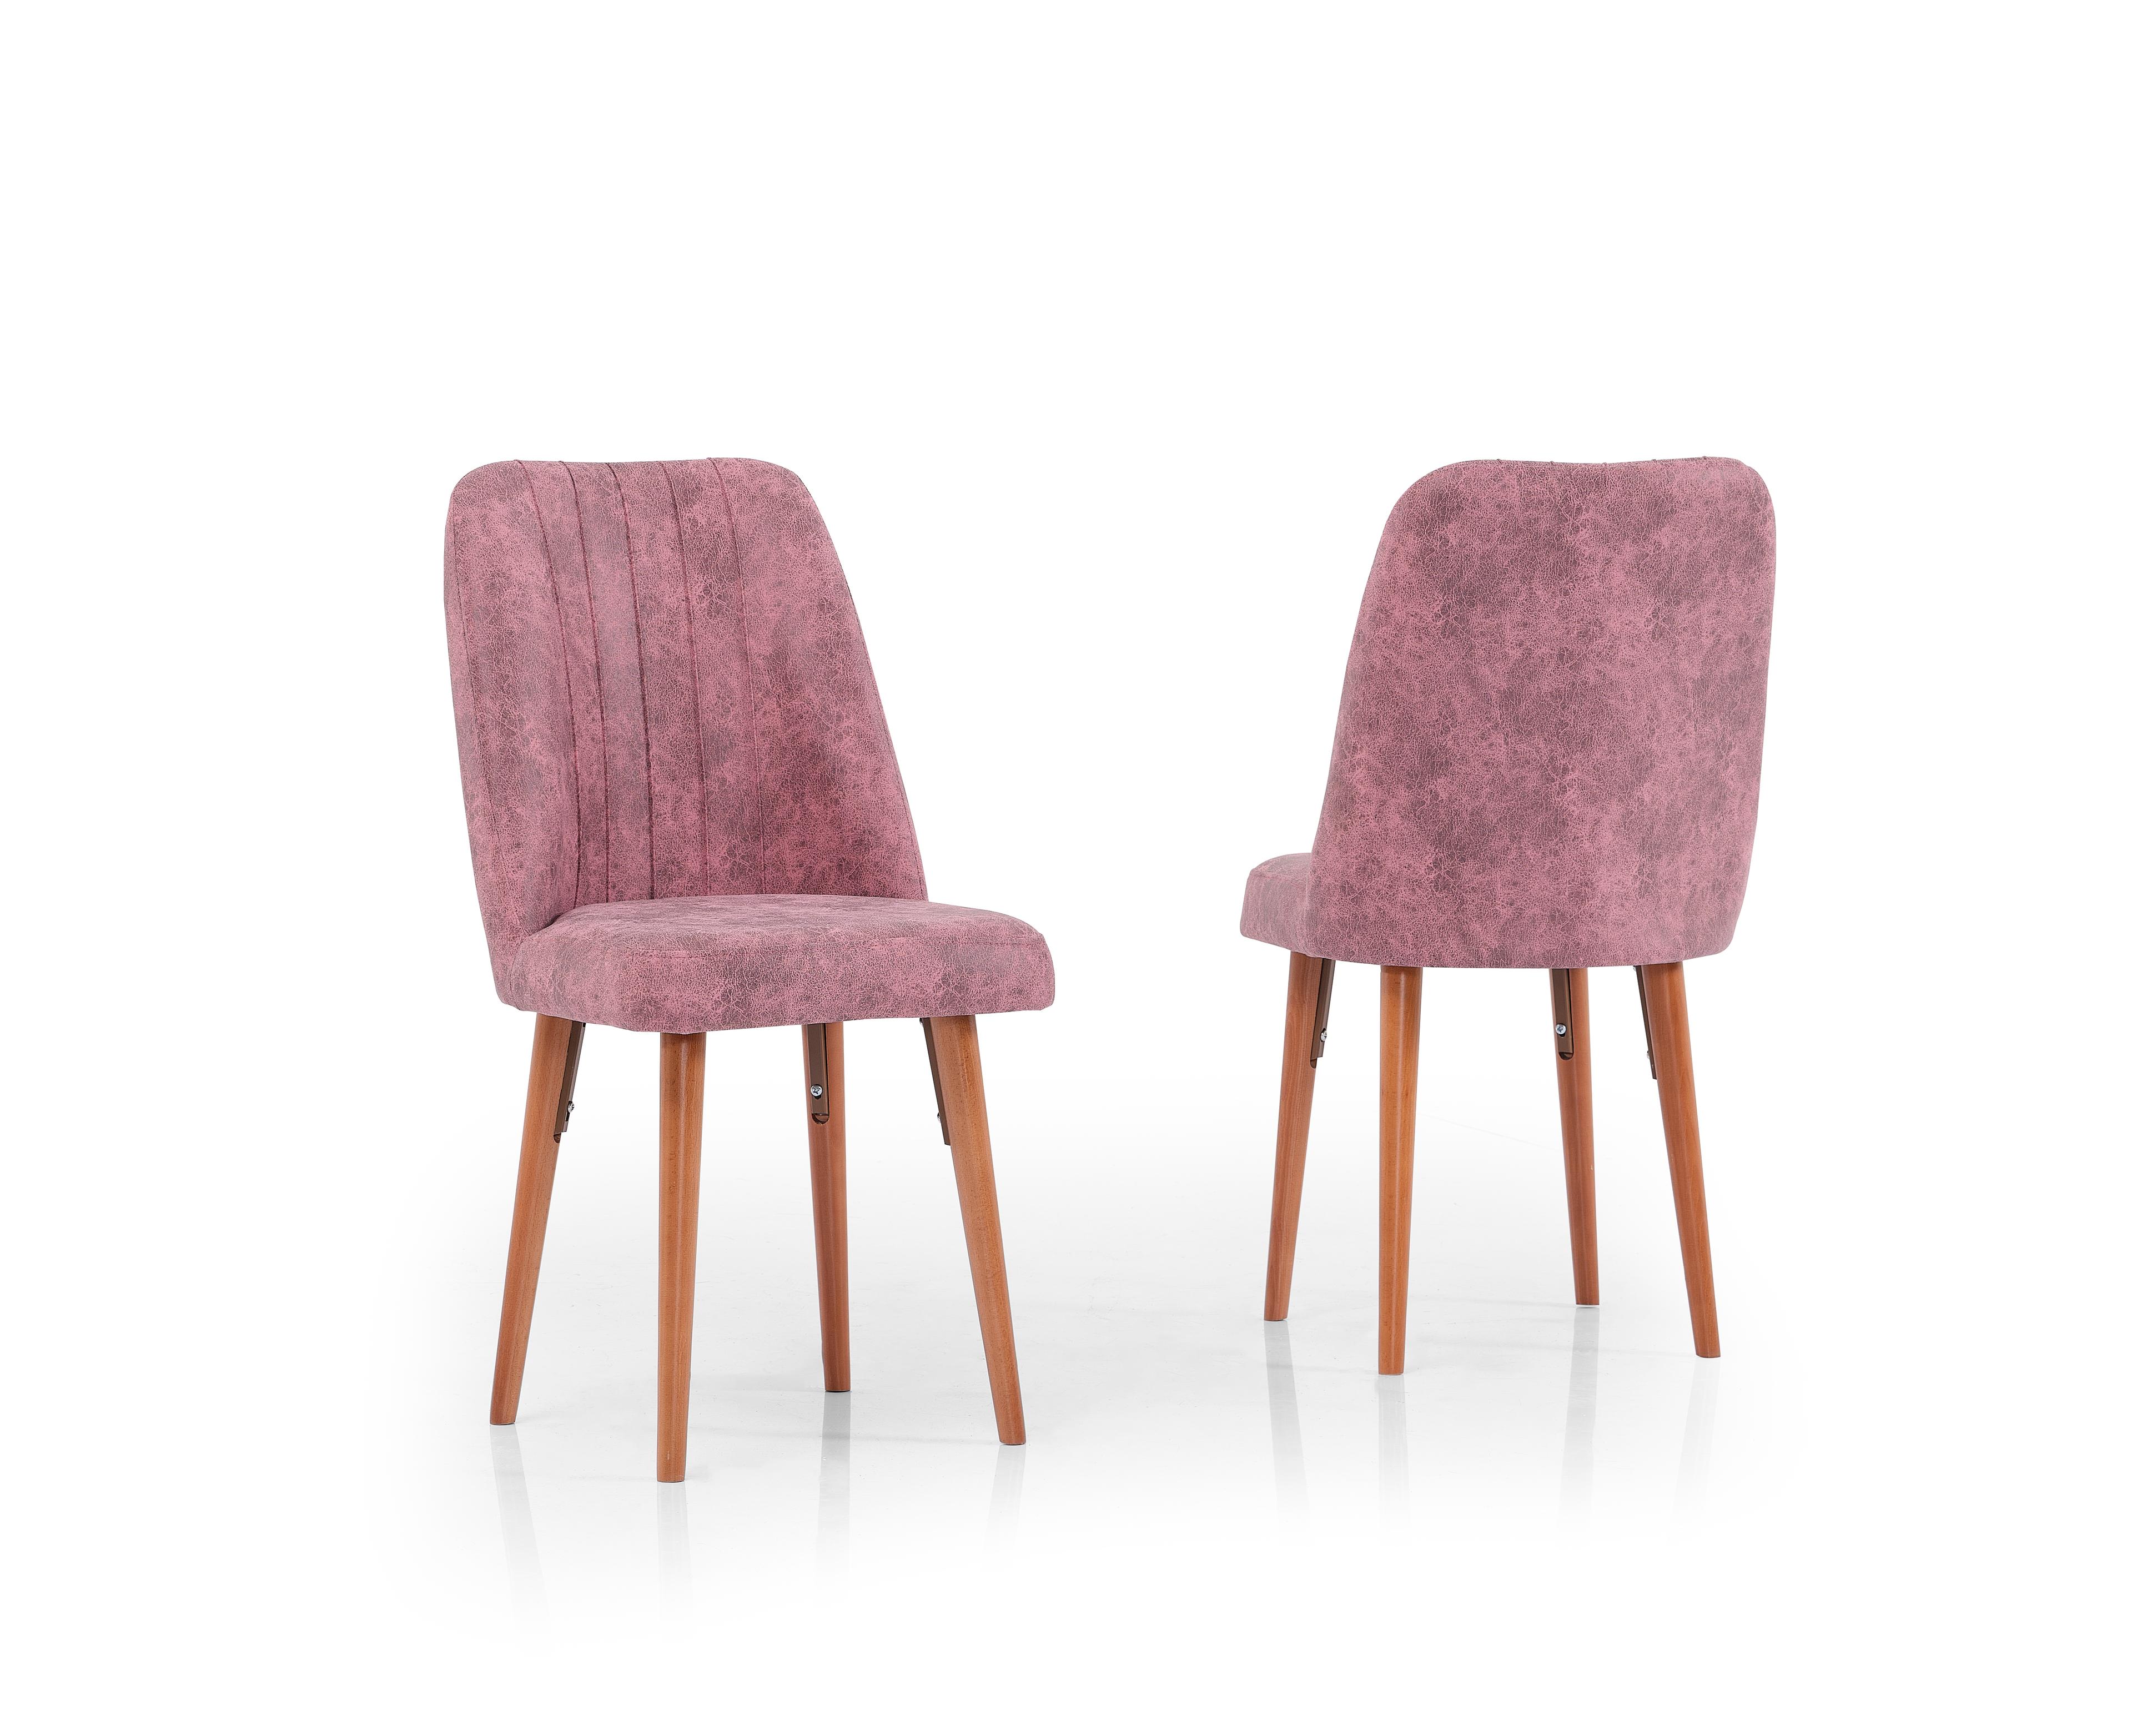 Olesivo Square Gold Chair - Pink